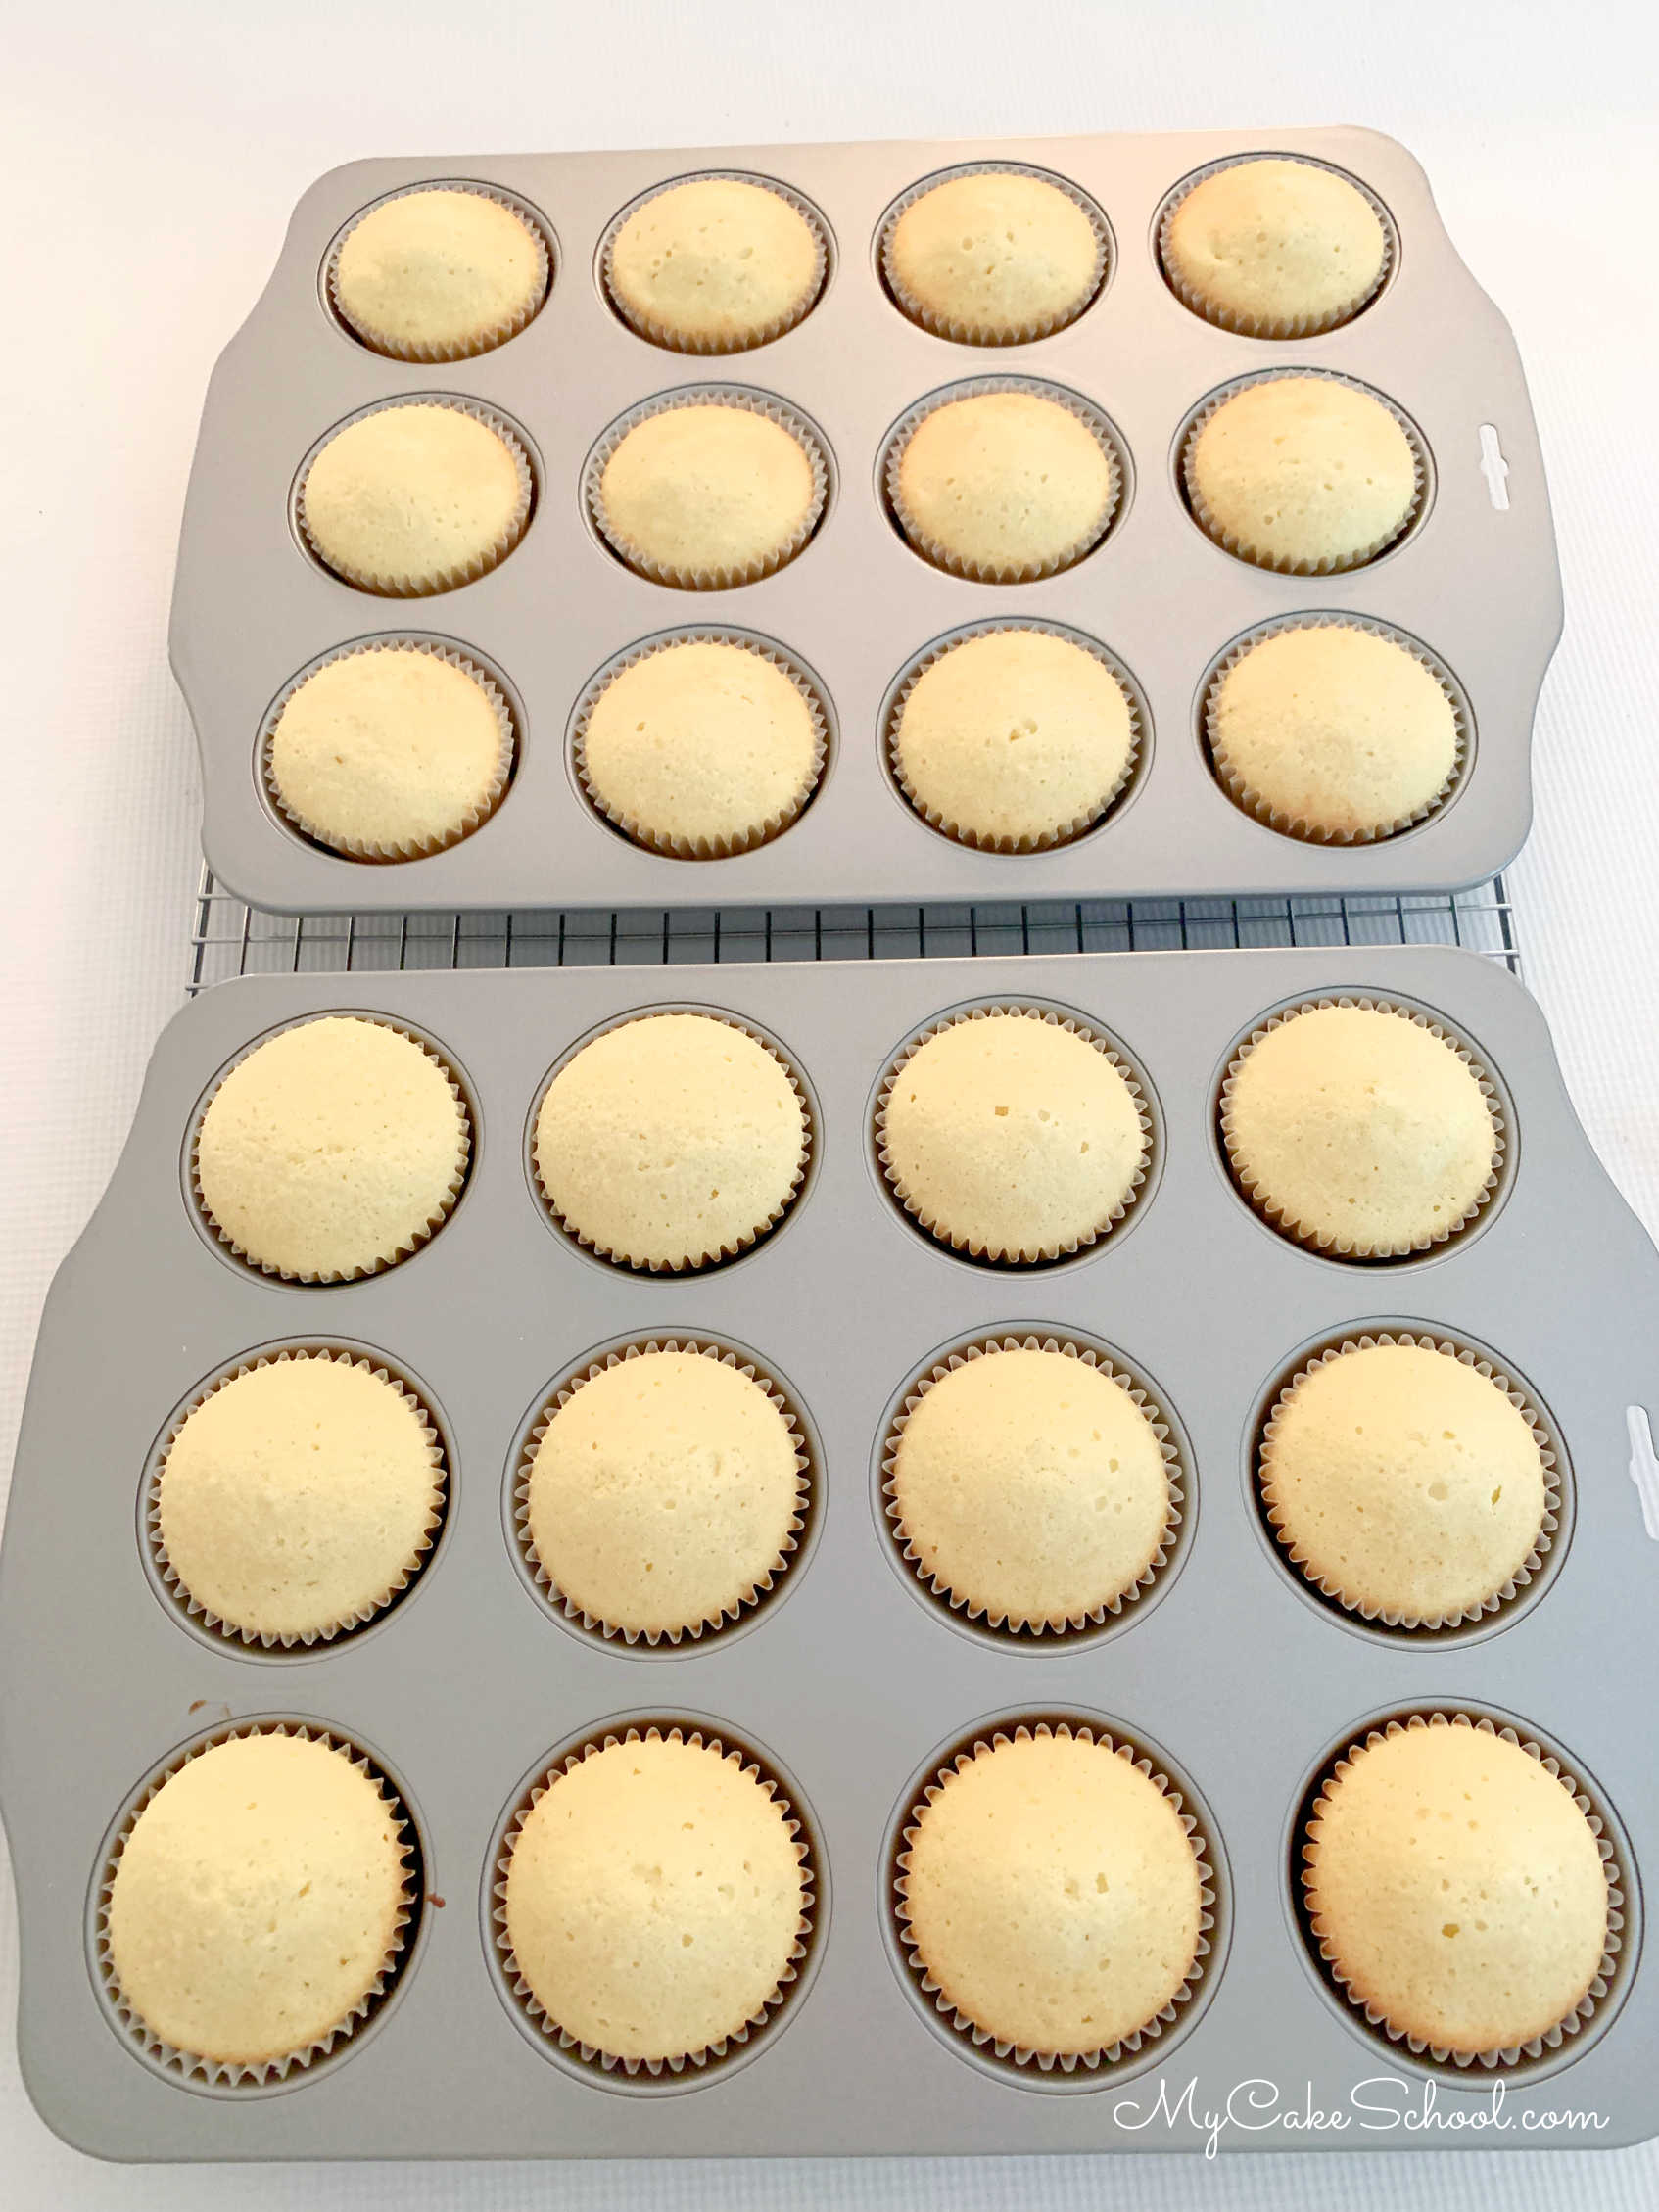 Two cupcake pans filled with freshly baked vanilla cupcakes